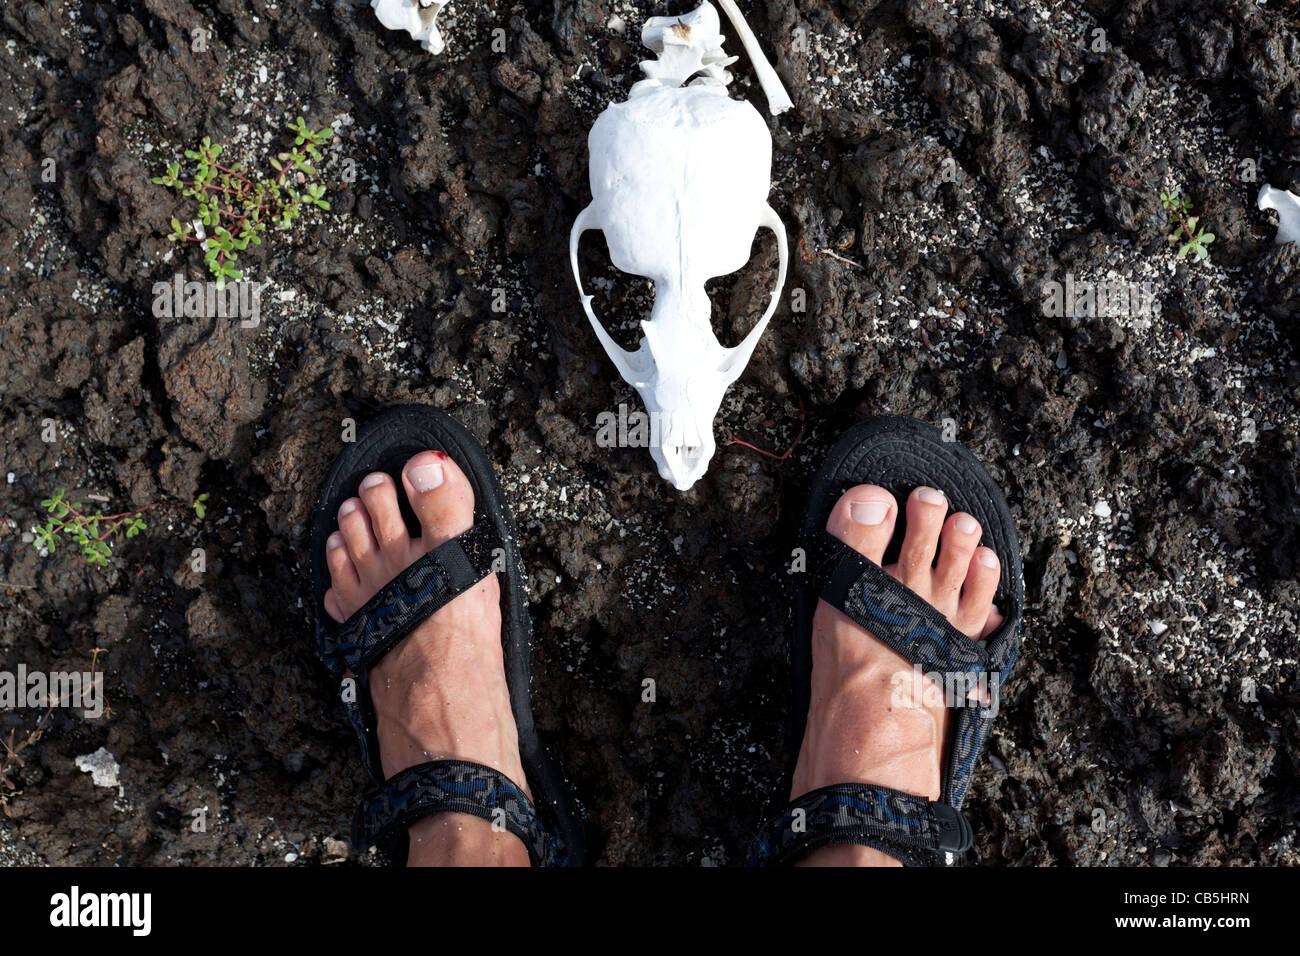 galapagos tourist animal nature wild goat feet protected fresh outdoors environment sunlight park reserve isolated sun endanger Stock Photo